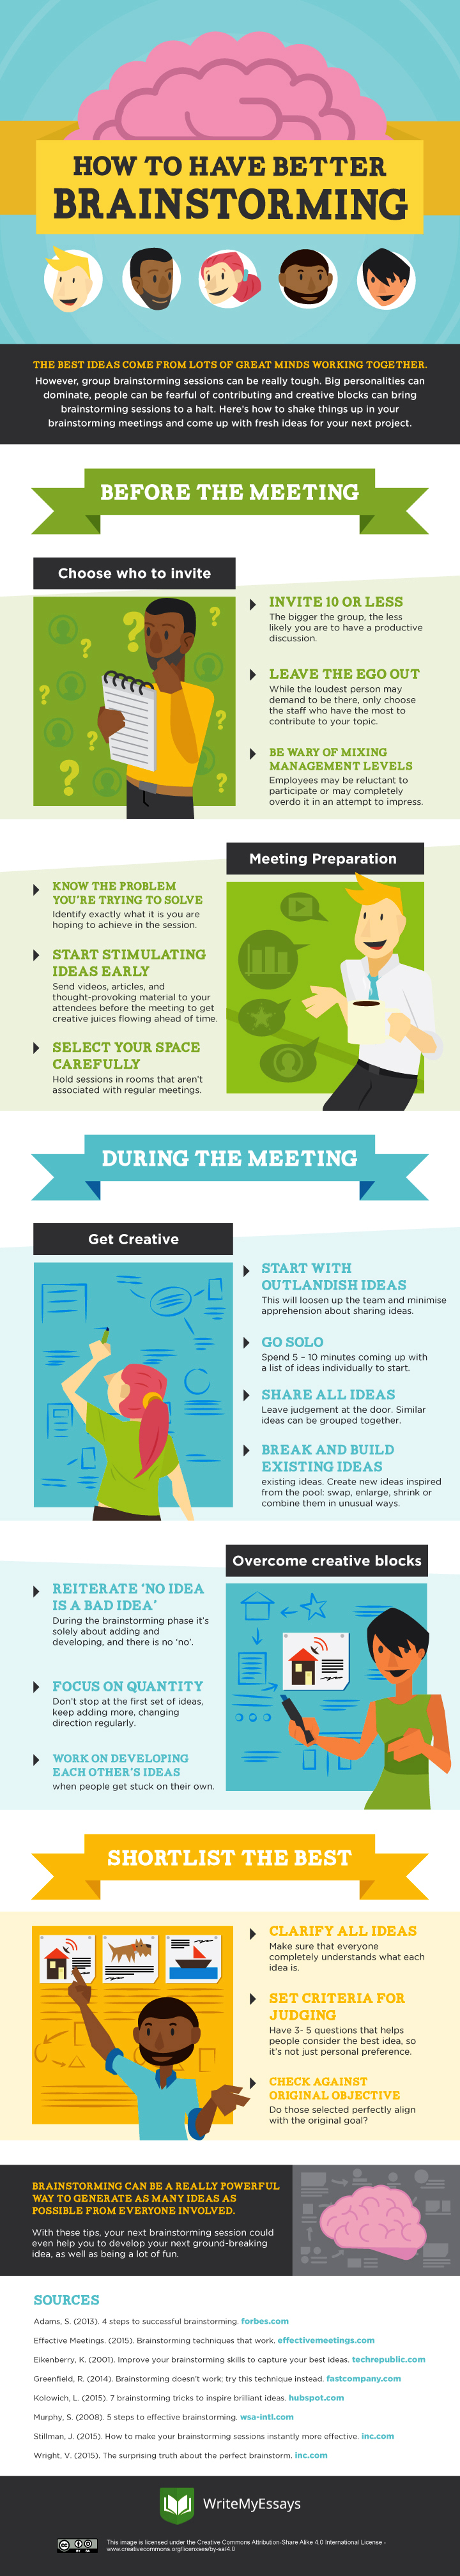 How To Have Better Brainstorming Sessions